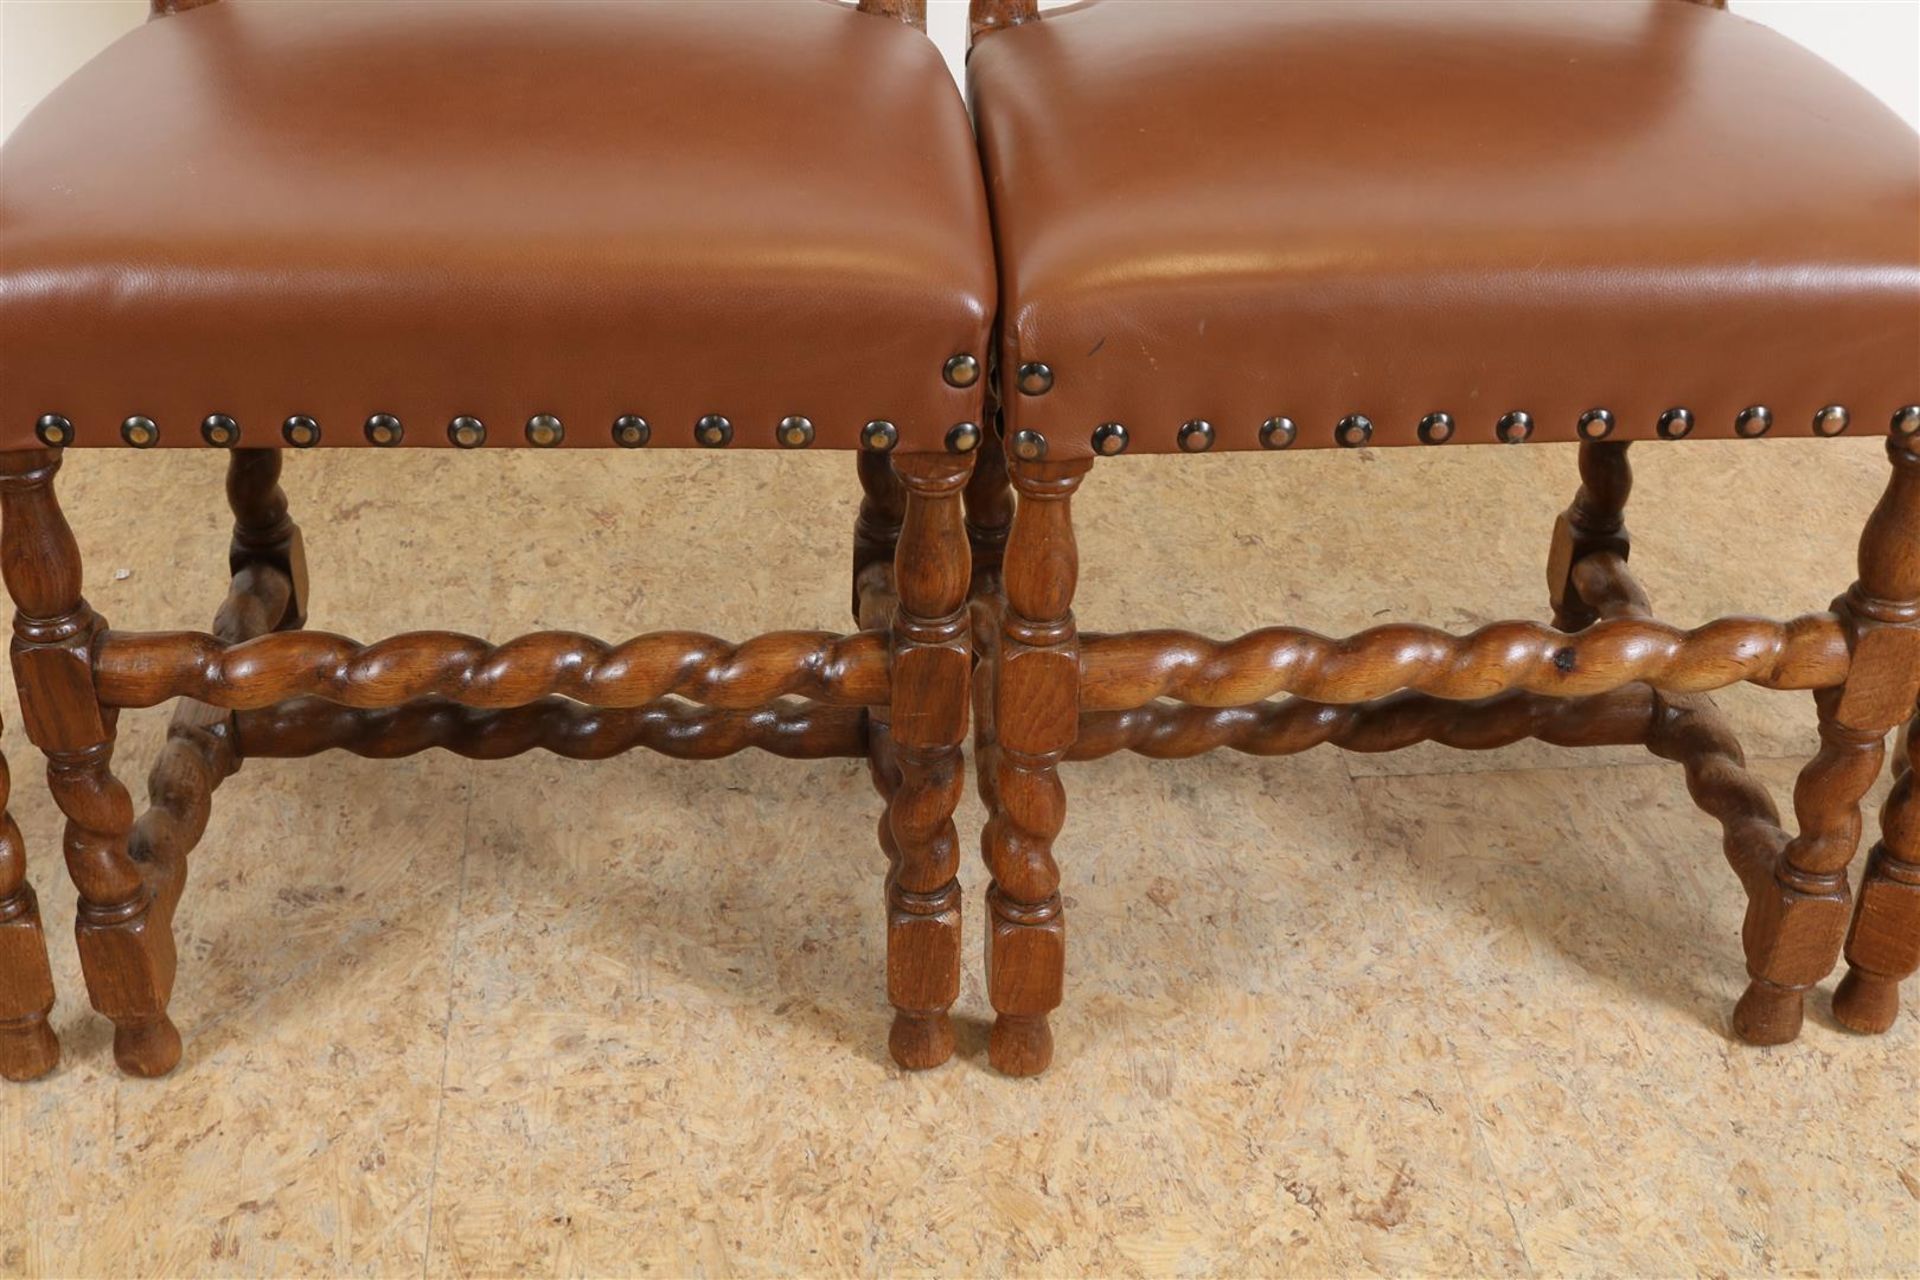 Series of 4 oak Renaissance-style chairs upholstered in brown leather. - Image 5 of 6